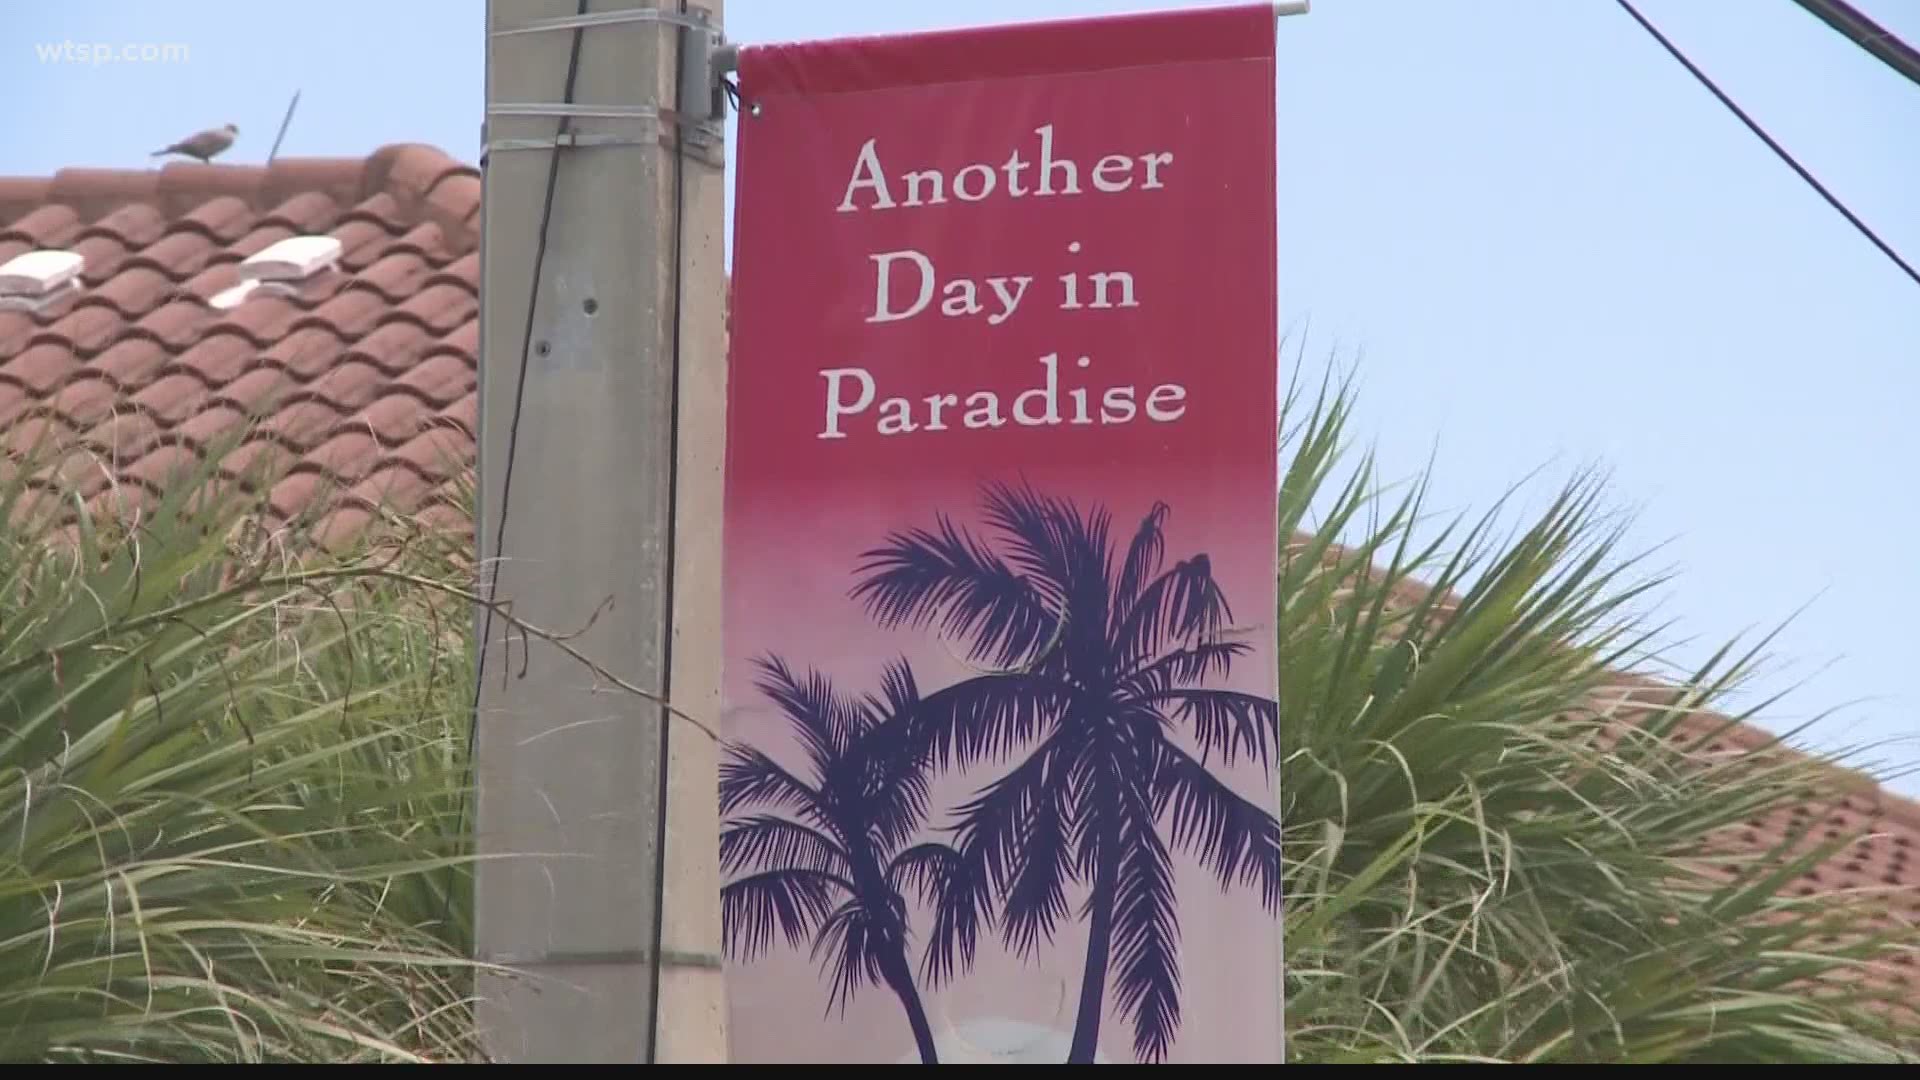 Tourism remains the top industry in both Manatee and Sarasota Counties, and the industry has lost a lot of money ever since it was shut down in March due to COVID-19